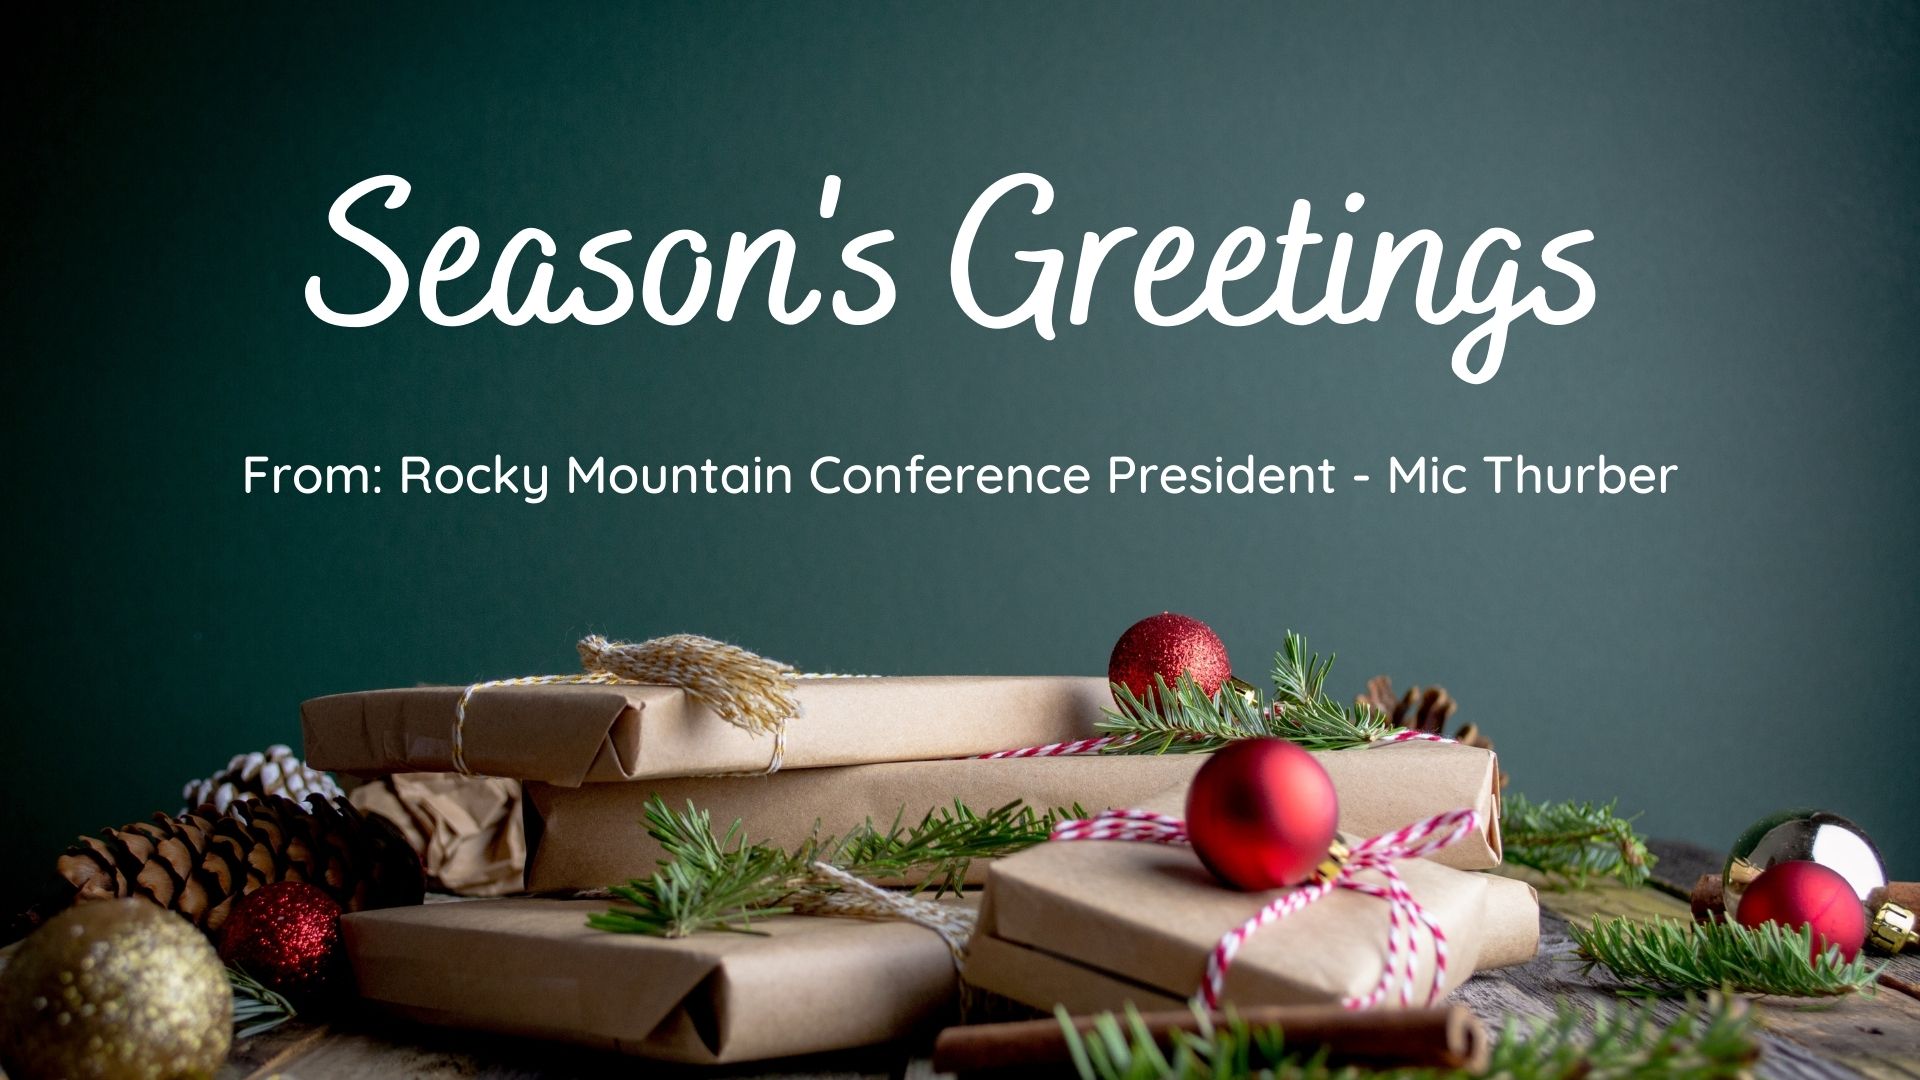 SEASON’S MESSAGE FROM RMC PRESIDENT